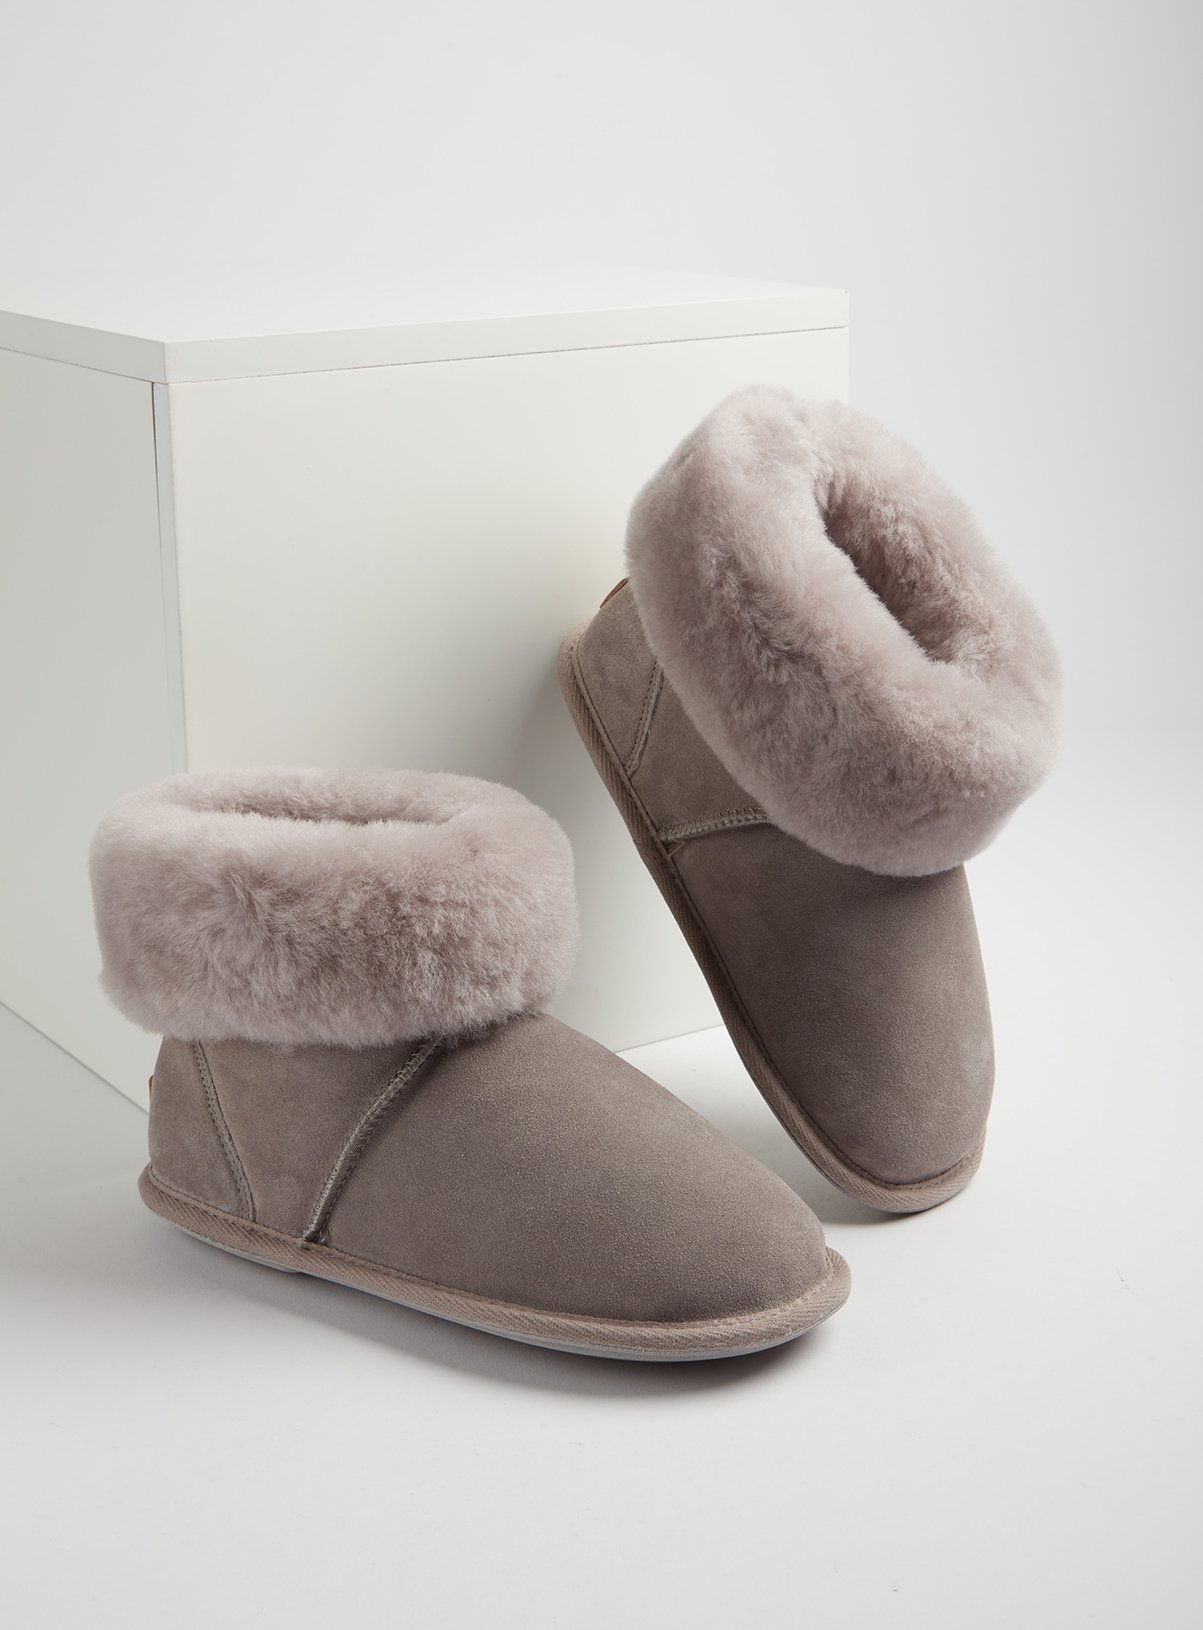 womens slipper boots with hard sole